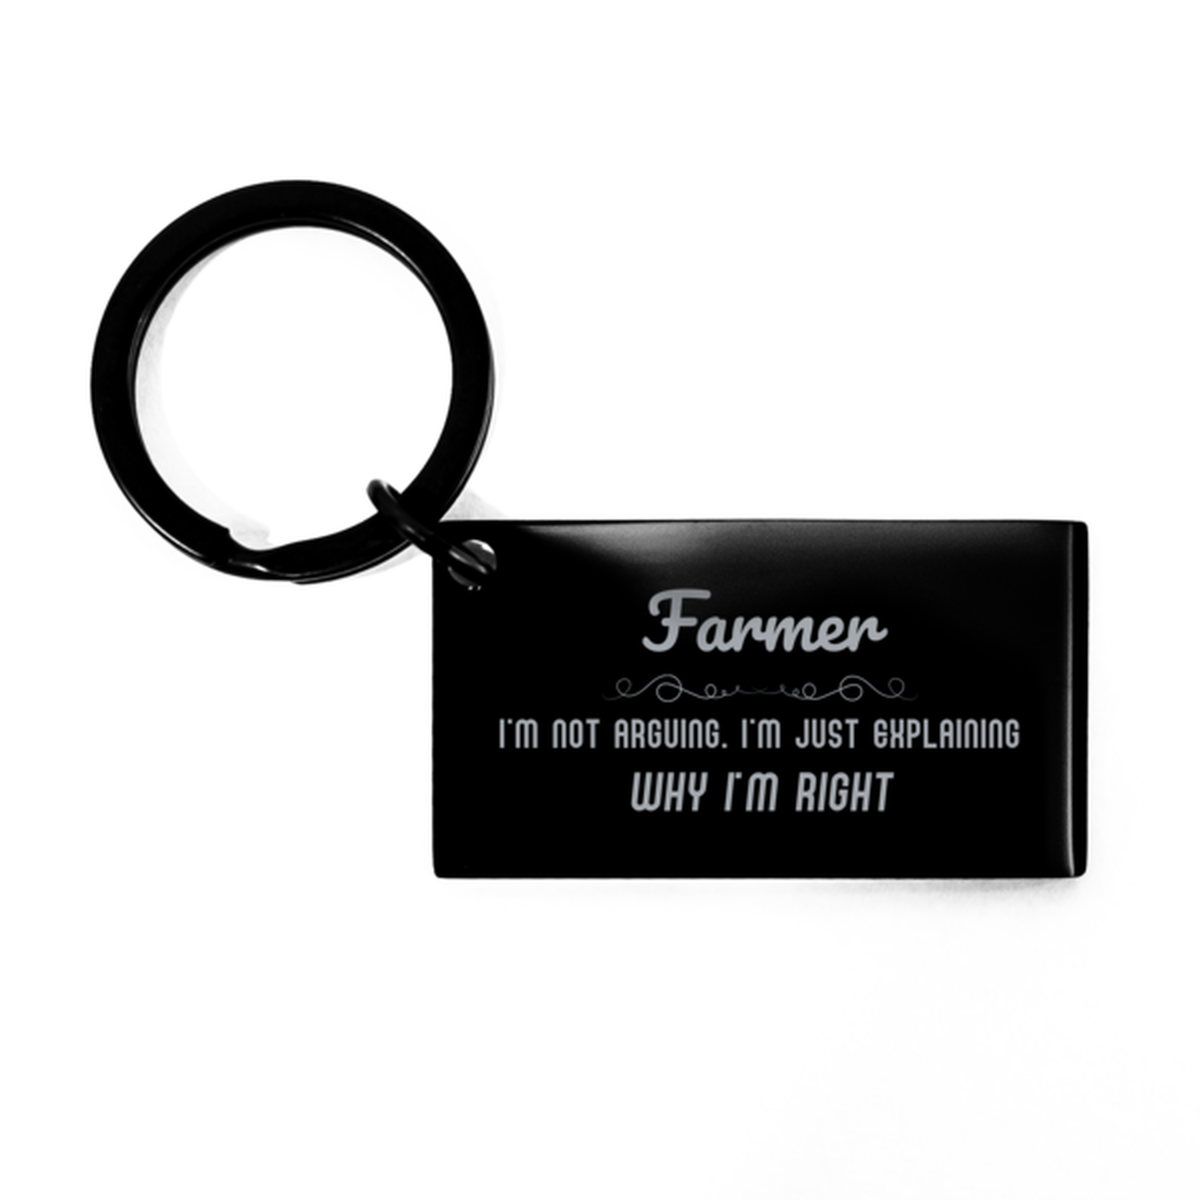 Farmer I'm not Arguing. I'm Just Explaining Why I'm RIGHT Keychain, Funny Saying Quote Farmer Gifts For Farmer Graduation Birthday Christmas Gifts for Men Women Coworker